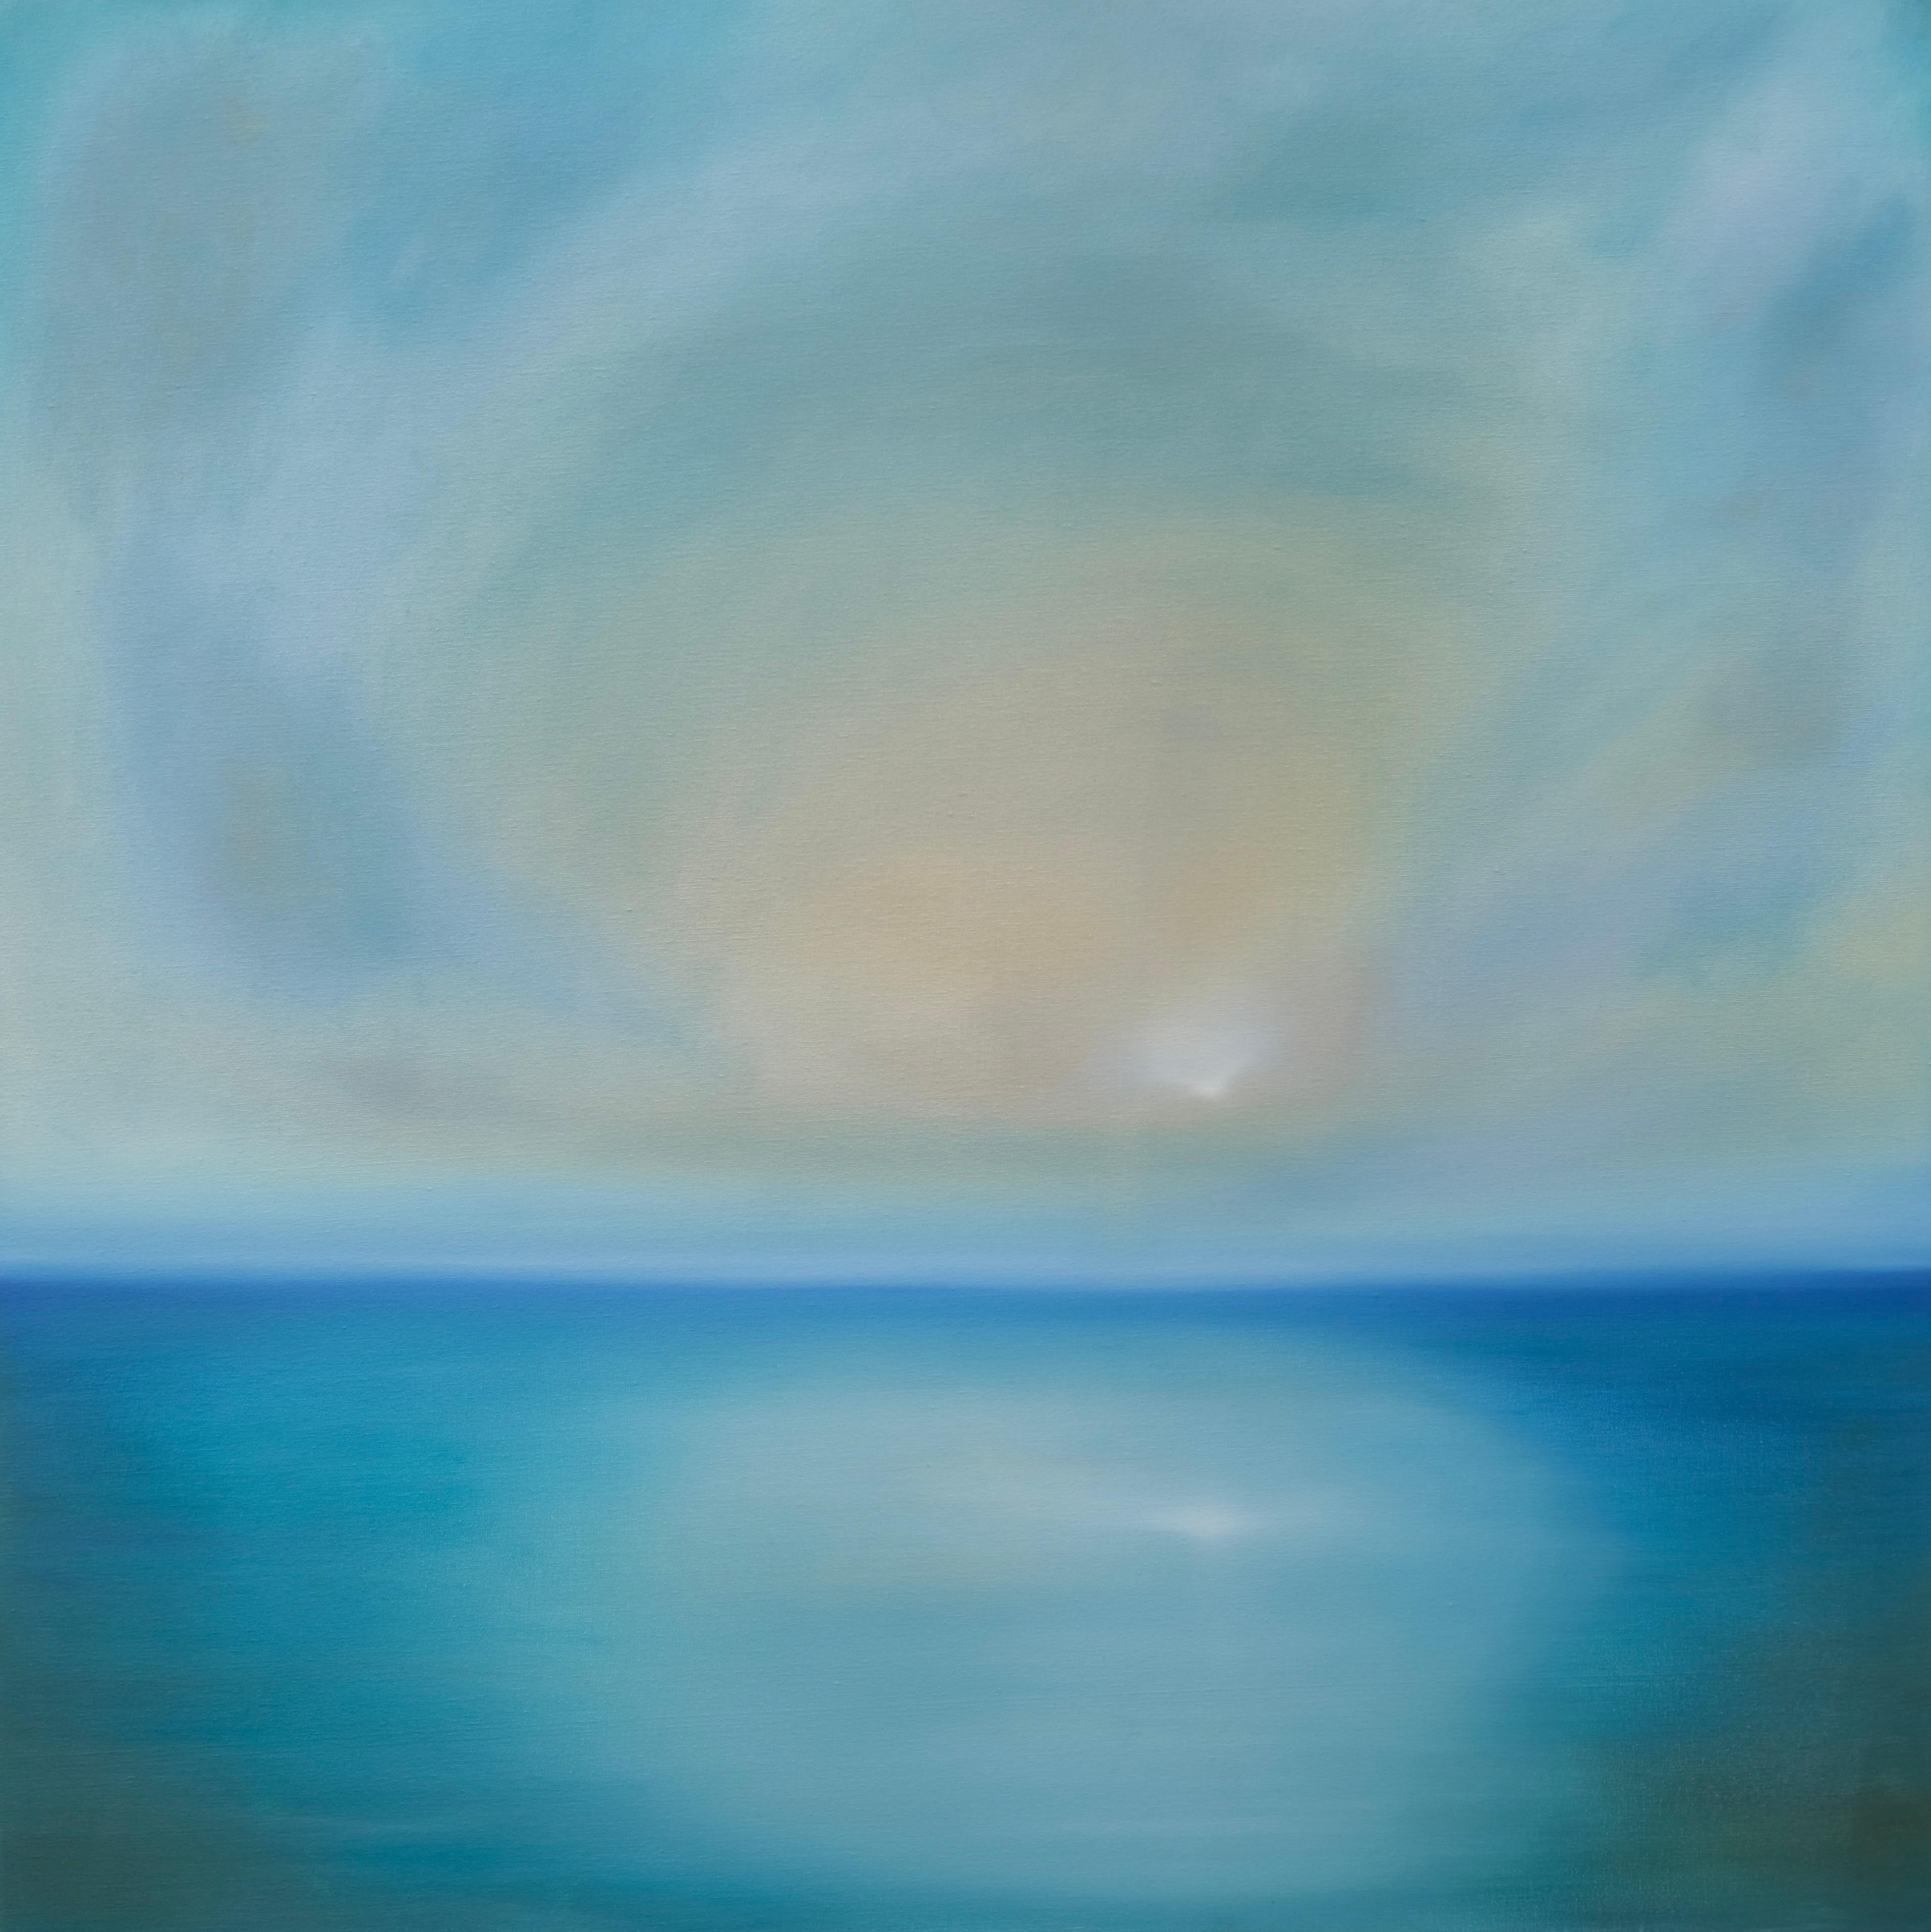 Landscape Painting Jonathan Speed - Calm Seas-original abstract seascape-ocean painting for sale-contemporary Art